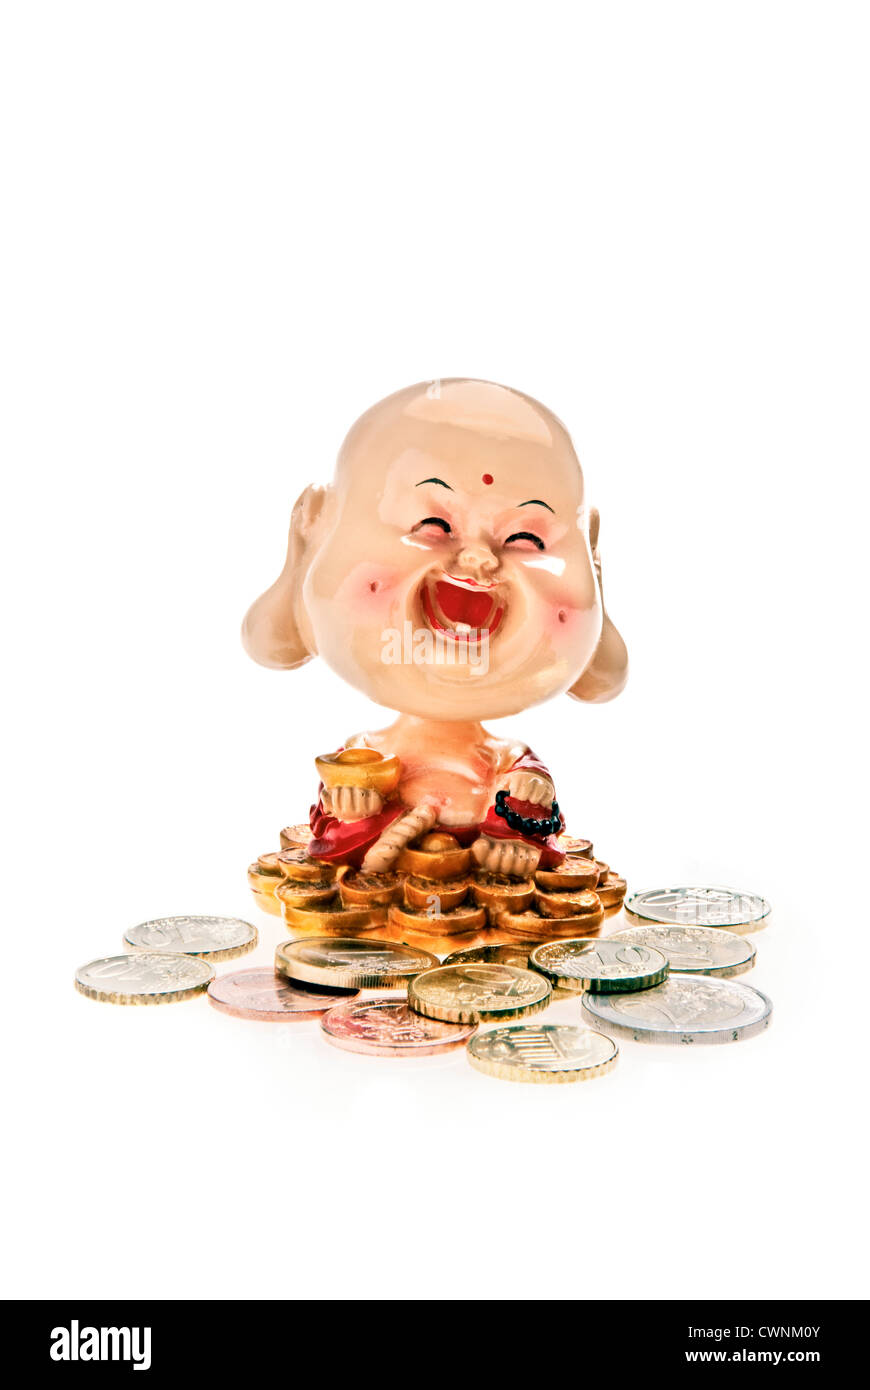 Buddha figure with Euro coins, isolated on 100% white background Stock Photo